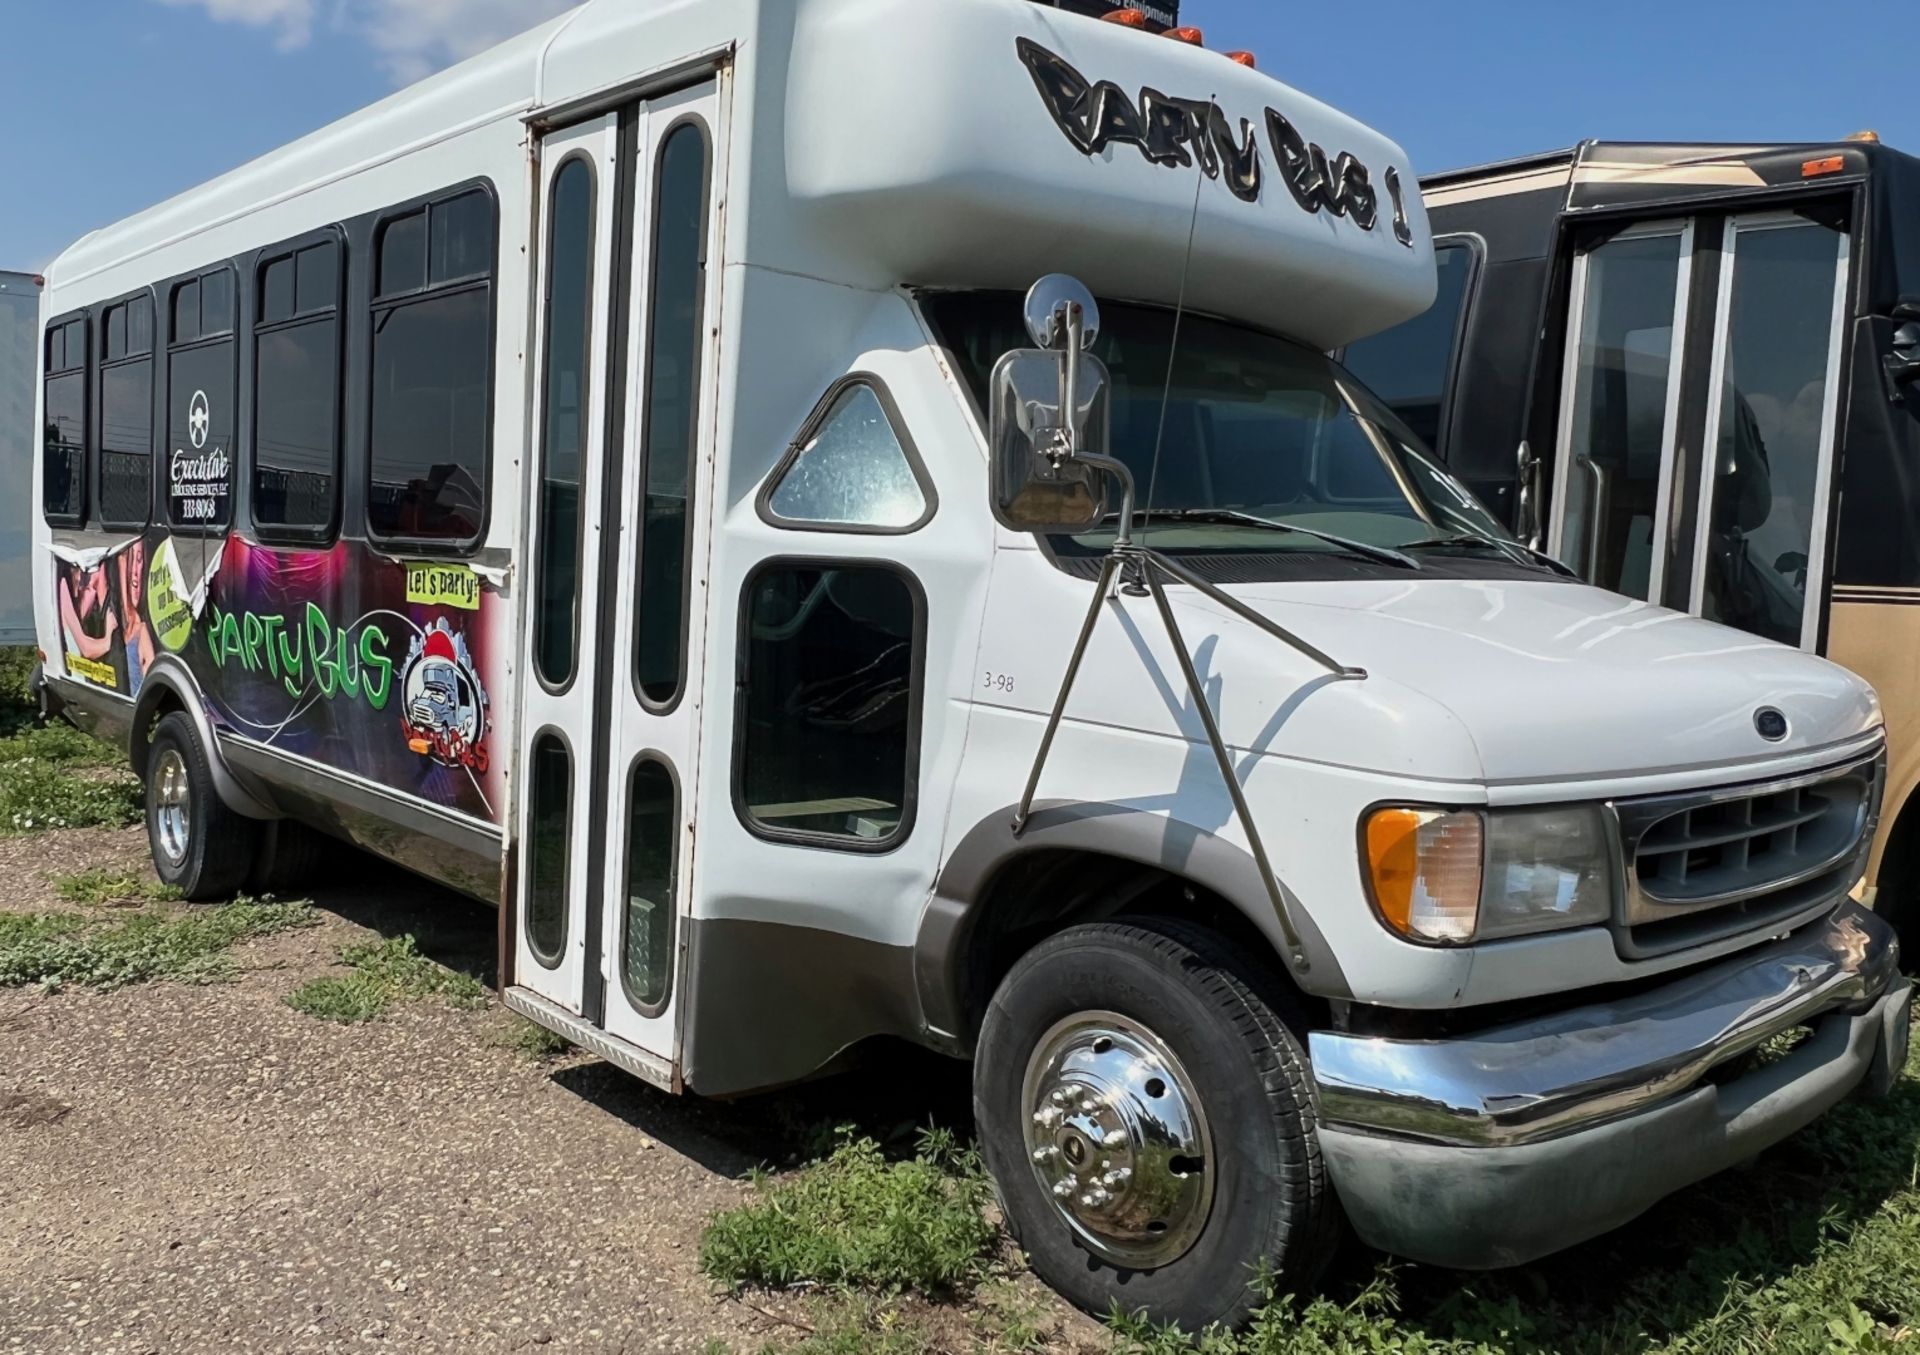 1998 FORD 23 PASSENGER PARTY BUS - Image 2 of 4